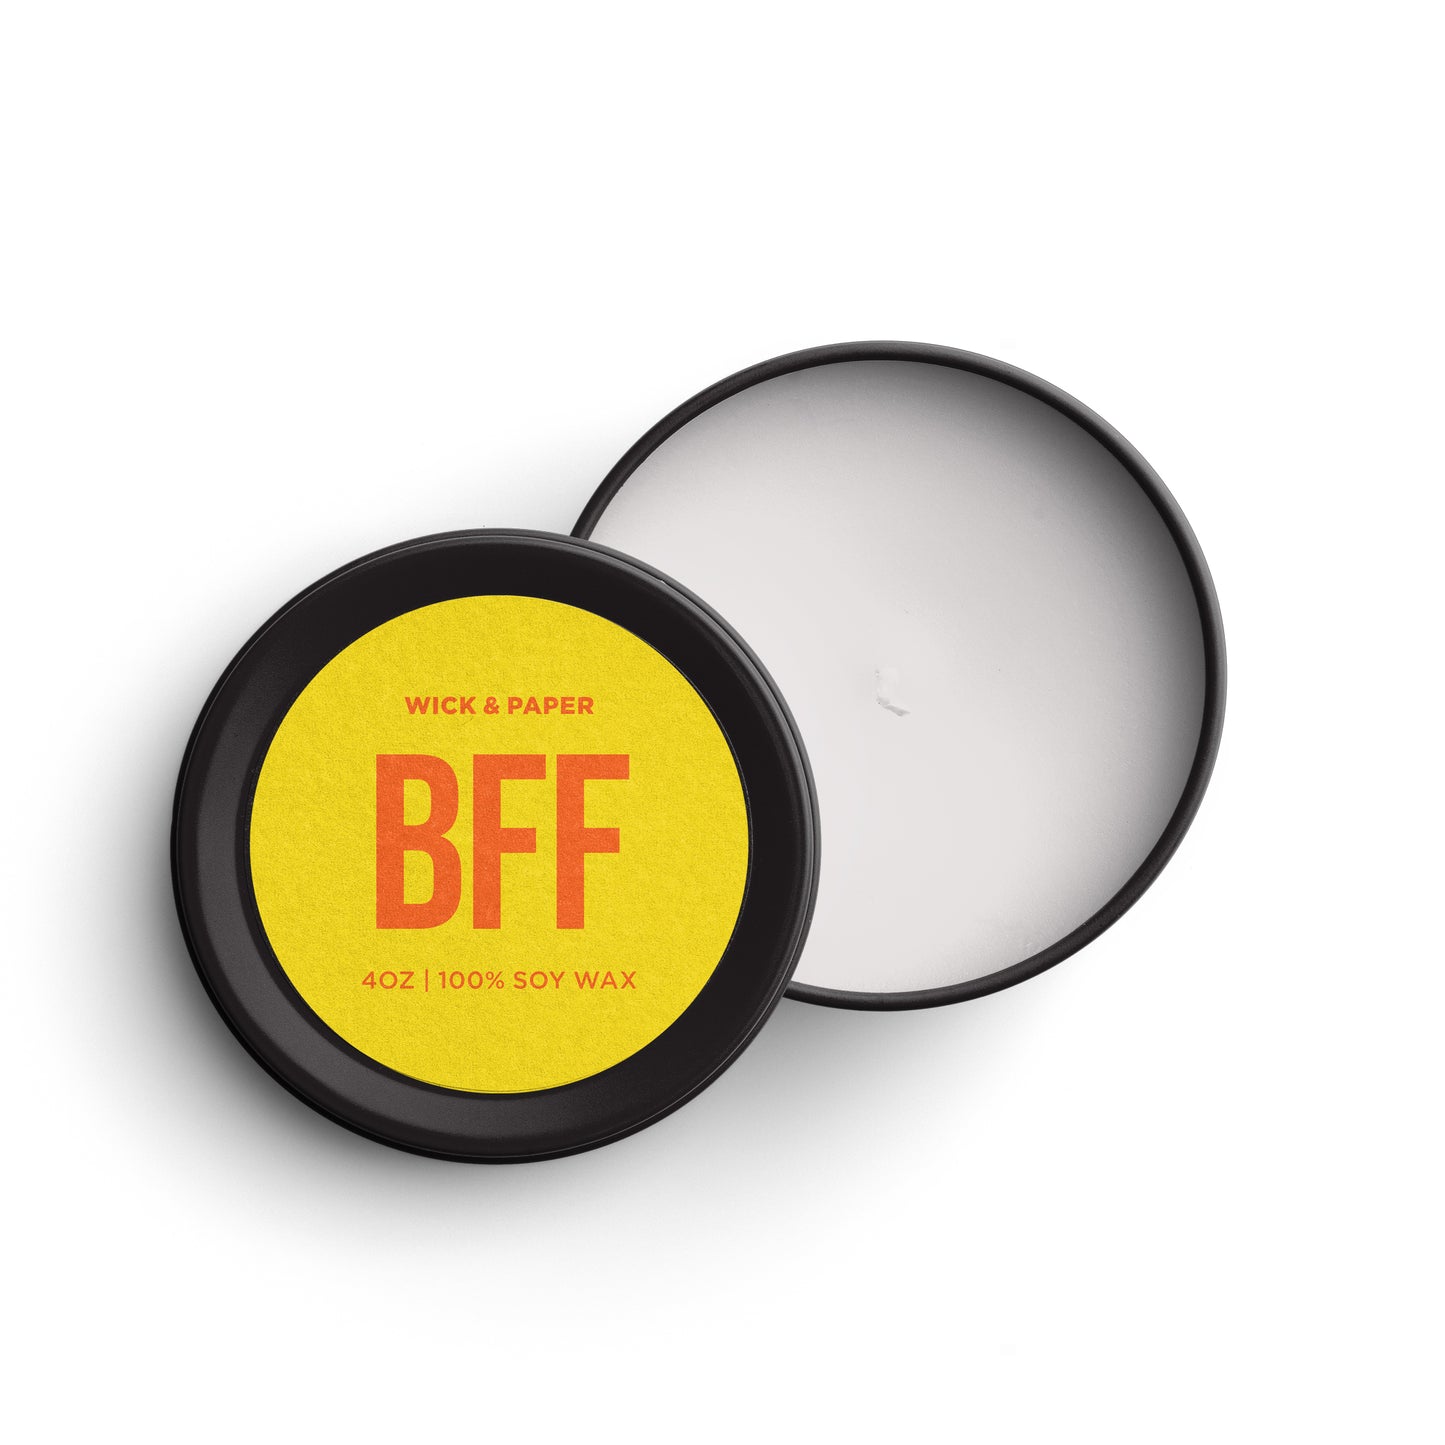 BFF (Best Friends Forever) candle